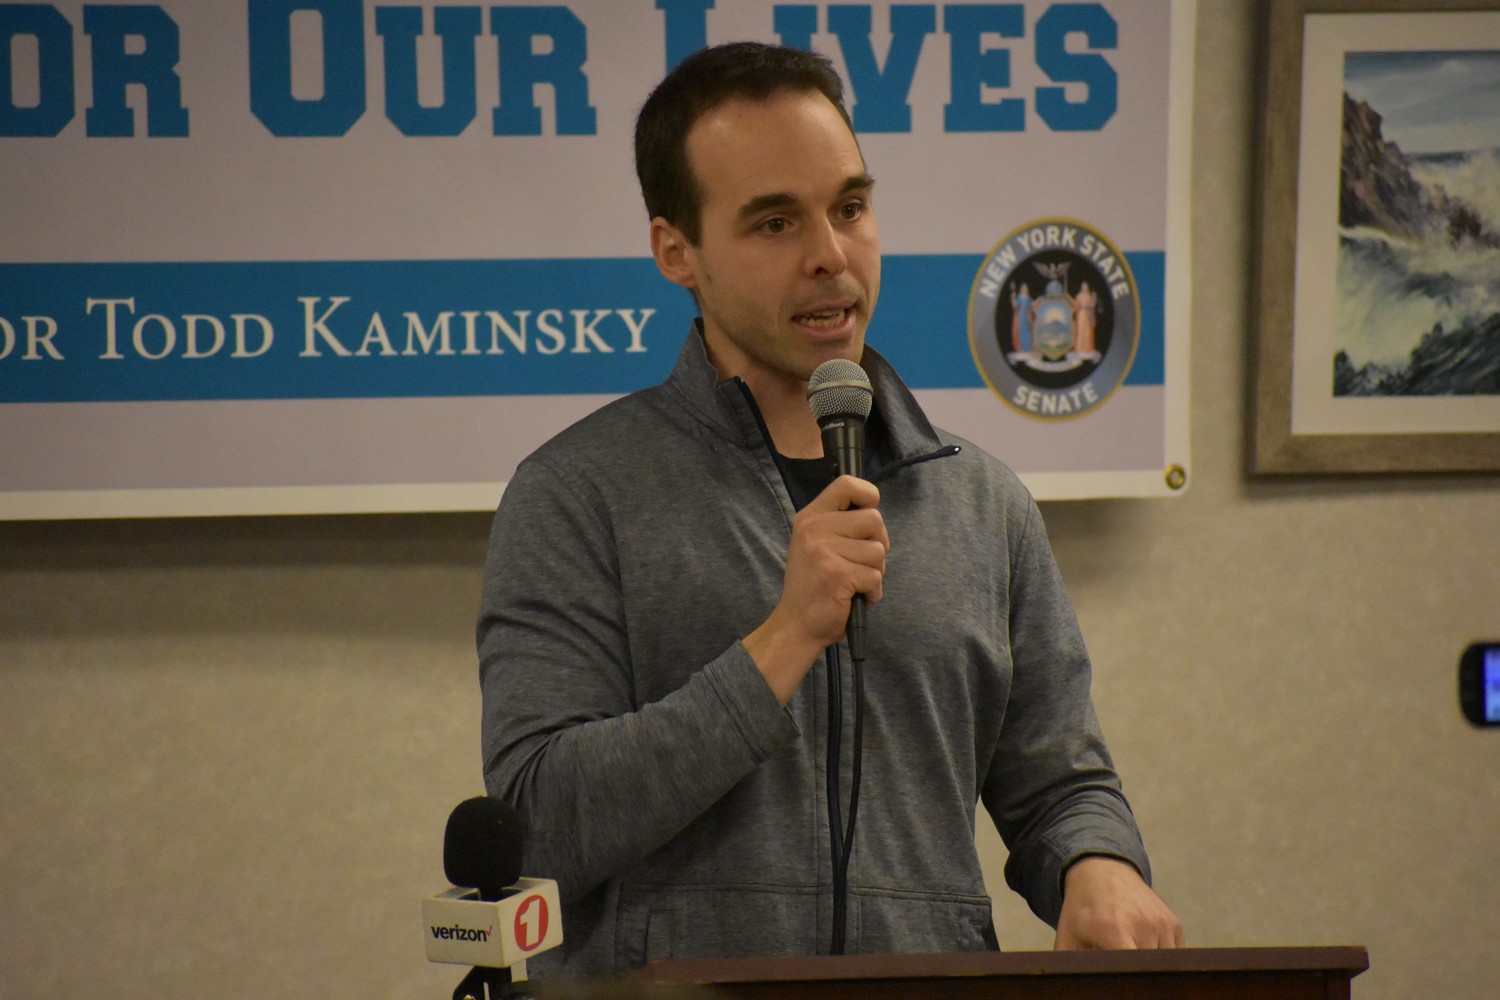 Robert Gaafar, a Rockville Centre resident who escaped the mass shooting in Las Vegas last October, told his story at a forum about gun violence at the Rockville Centre Public Library in April.